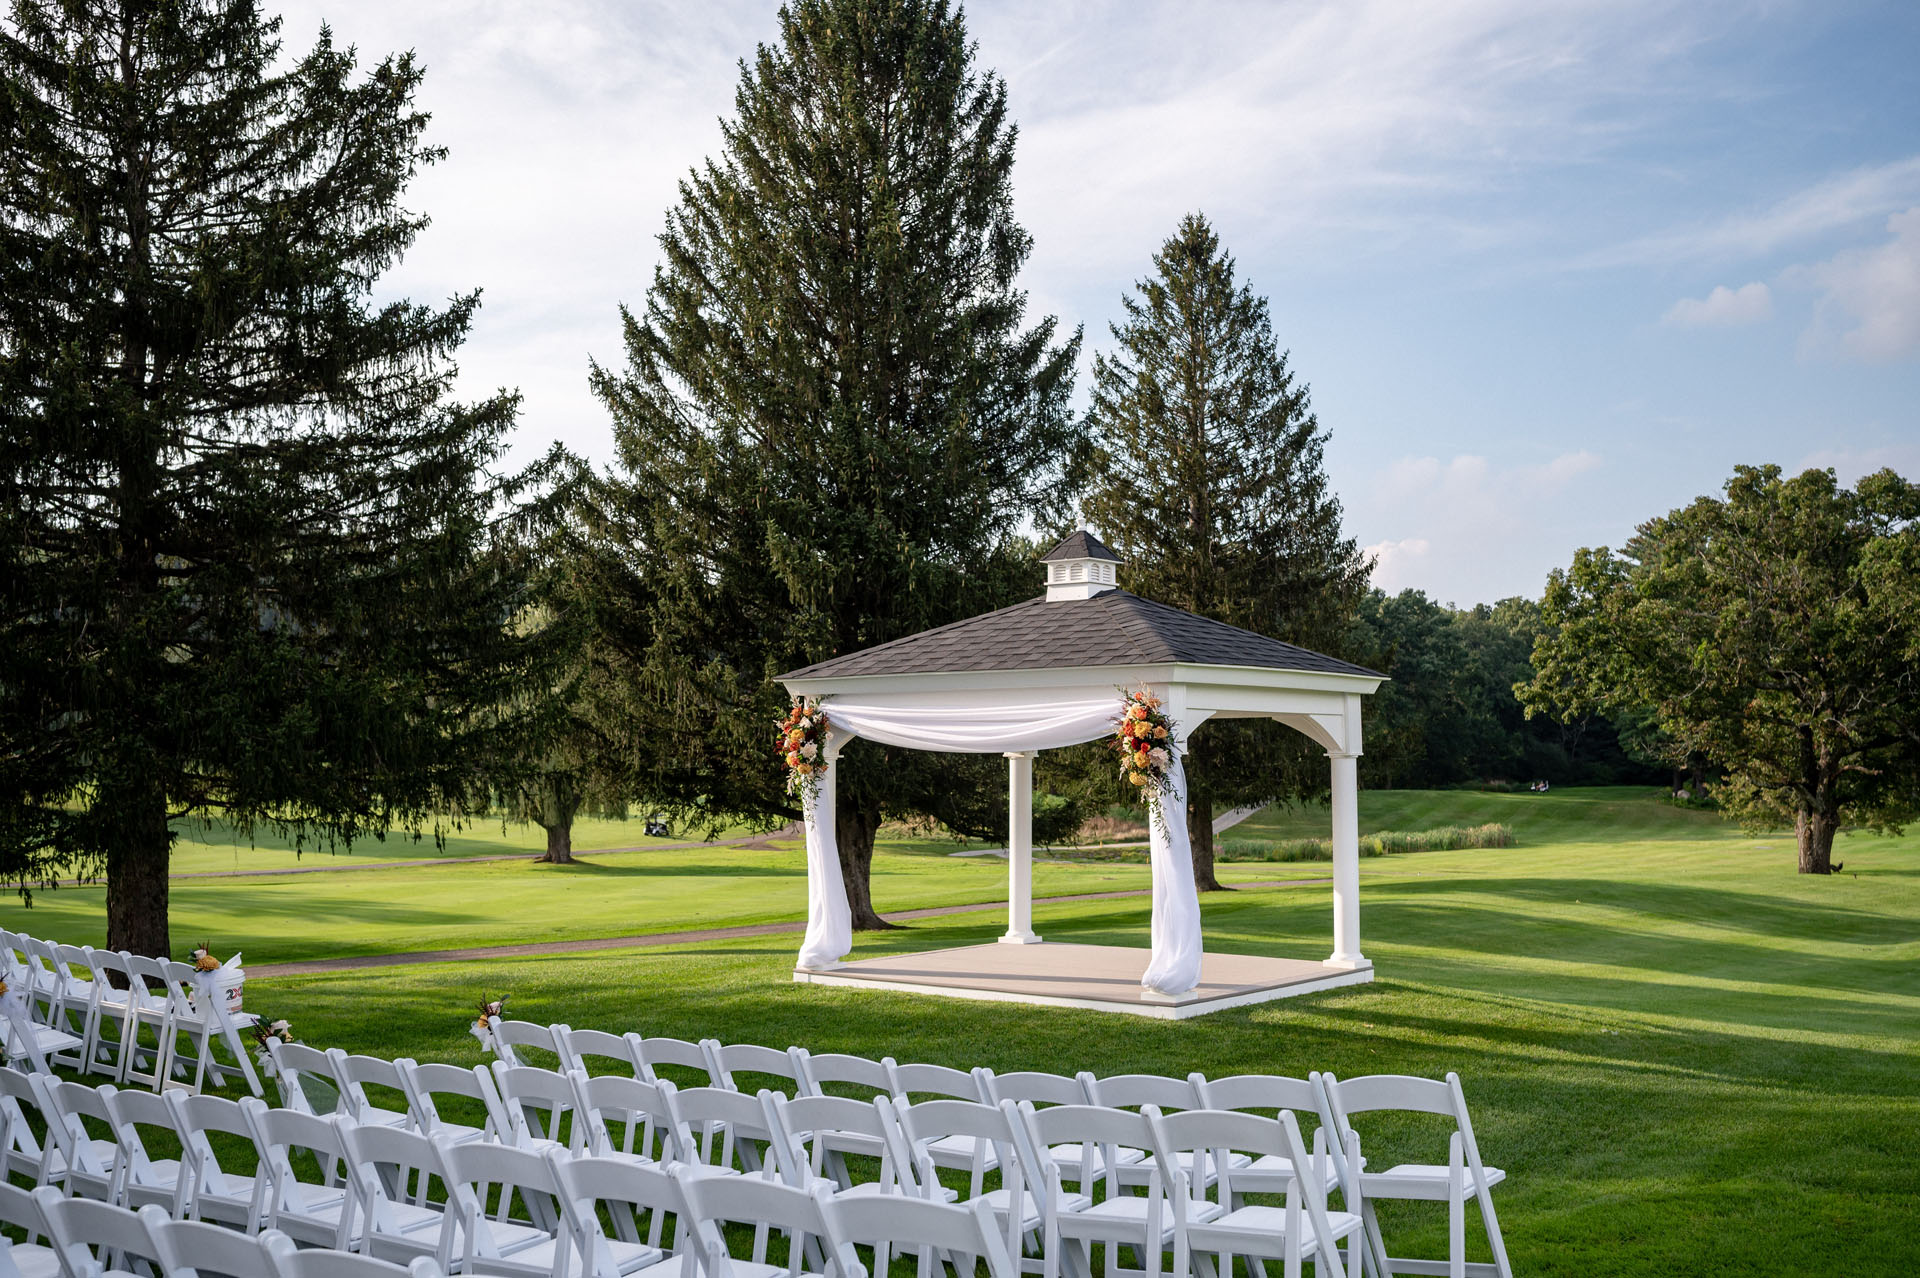 Beautiful outdoor wedding venue with verdant rolling hills and florally-adorned gazebo.